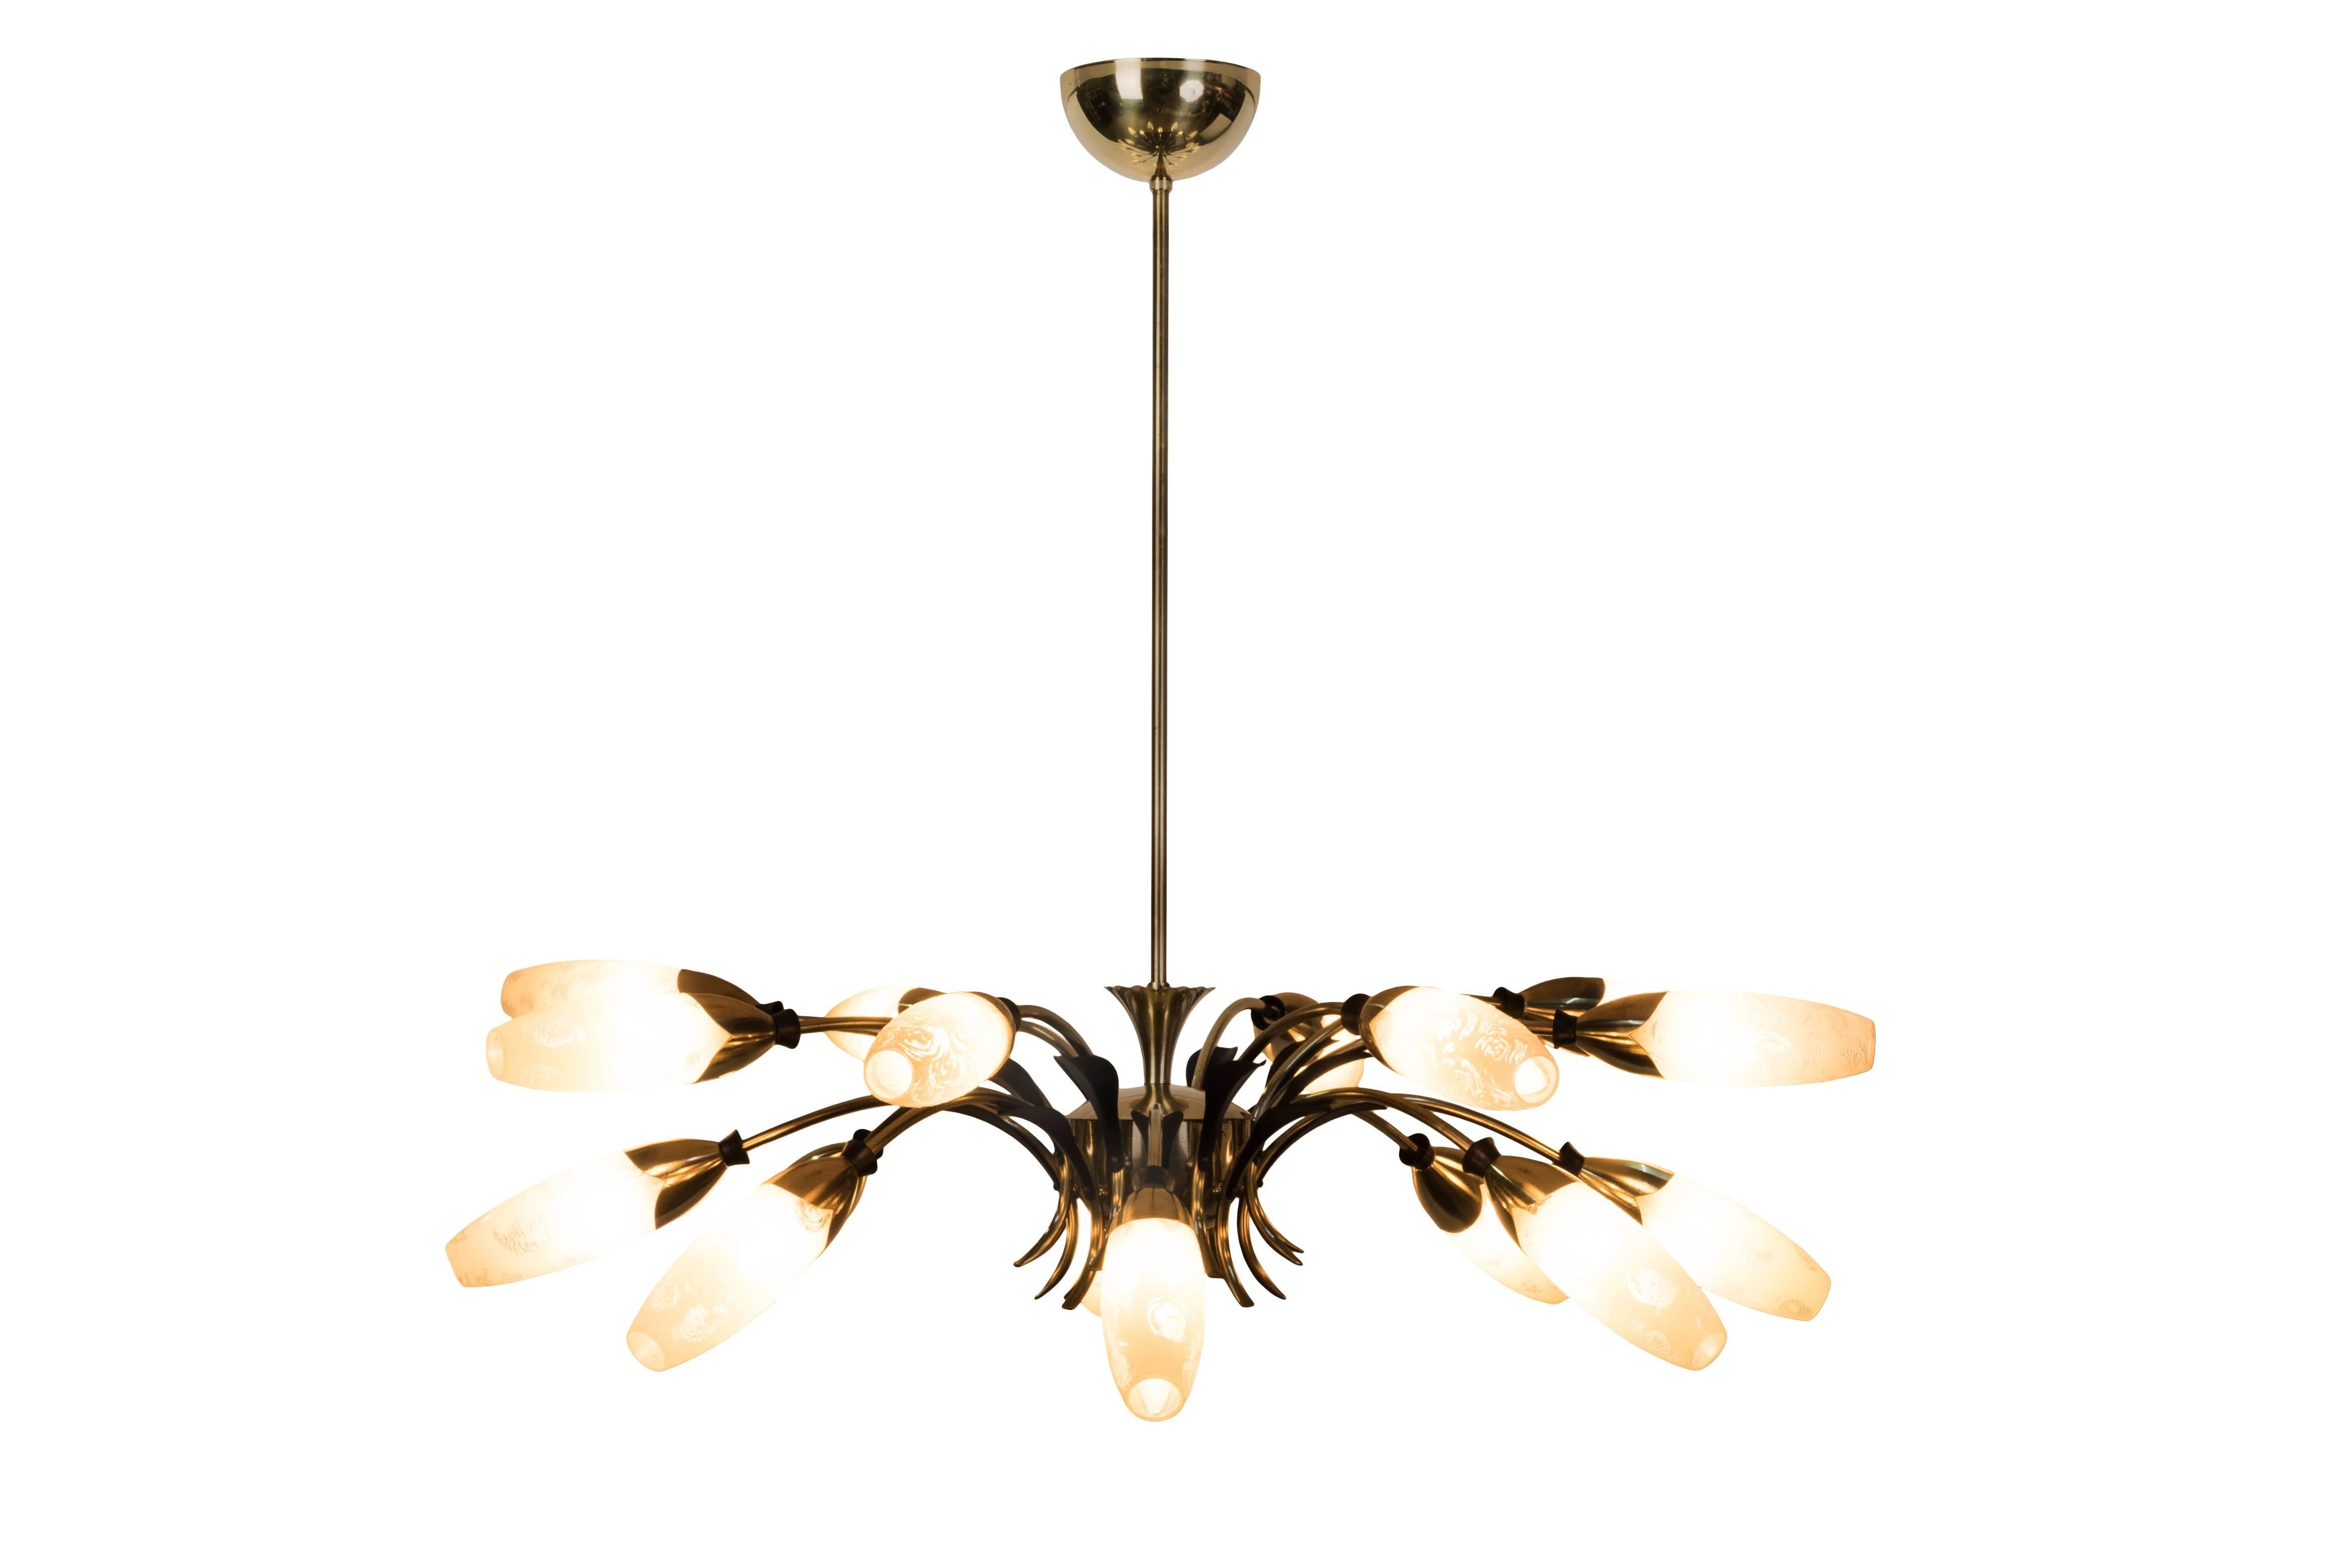 This spectacular 1950s Sputnik spider chandelier features a sixteen arms brass frame with leafs and rings details in black enamel and a floral motif glass shades in enamel pearl color. The piece cascades in two levels.

Made in Austria, circa